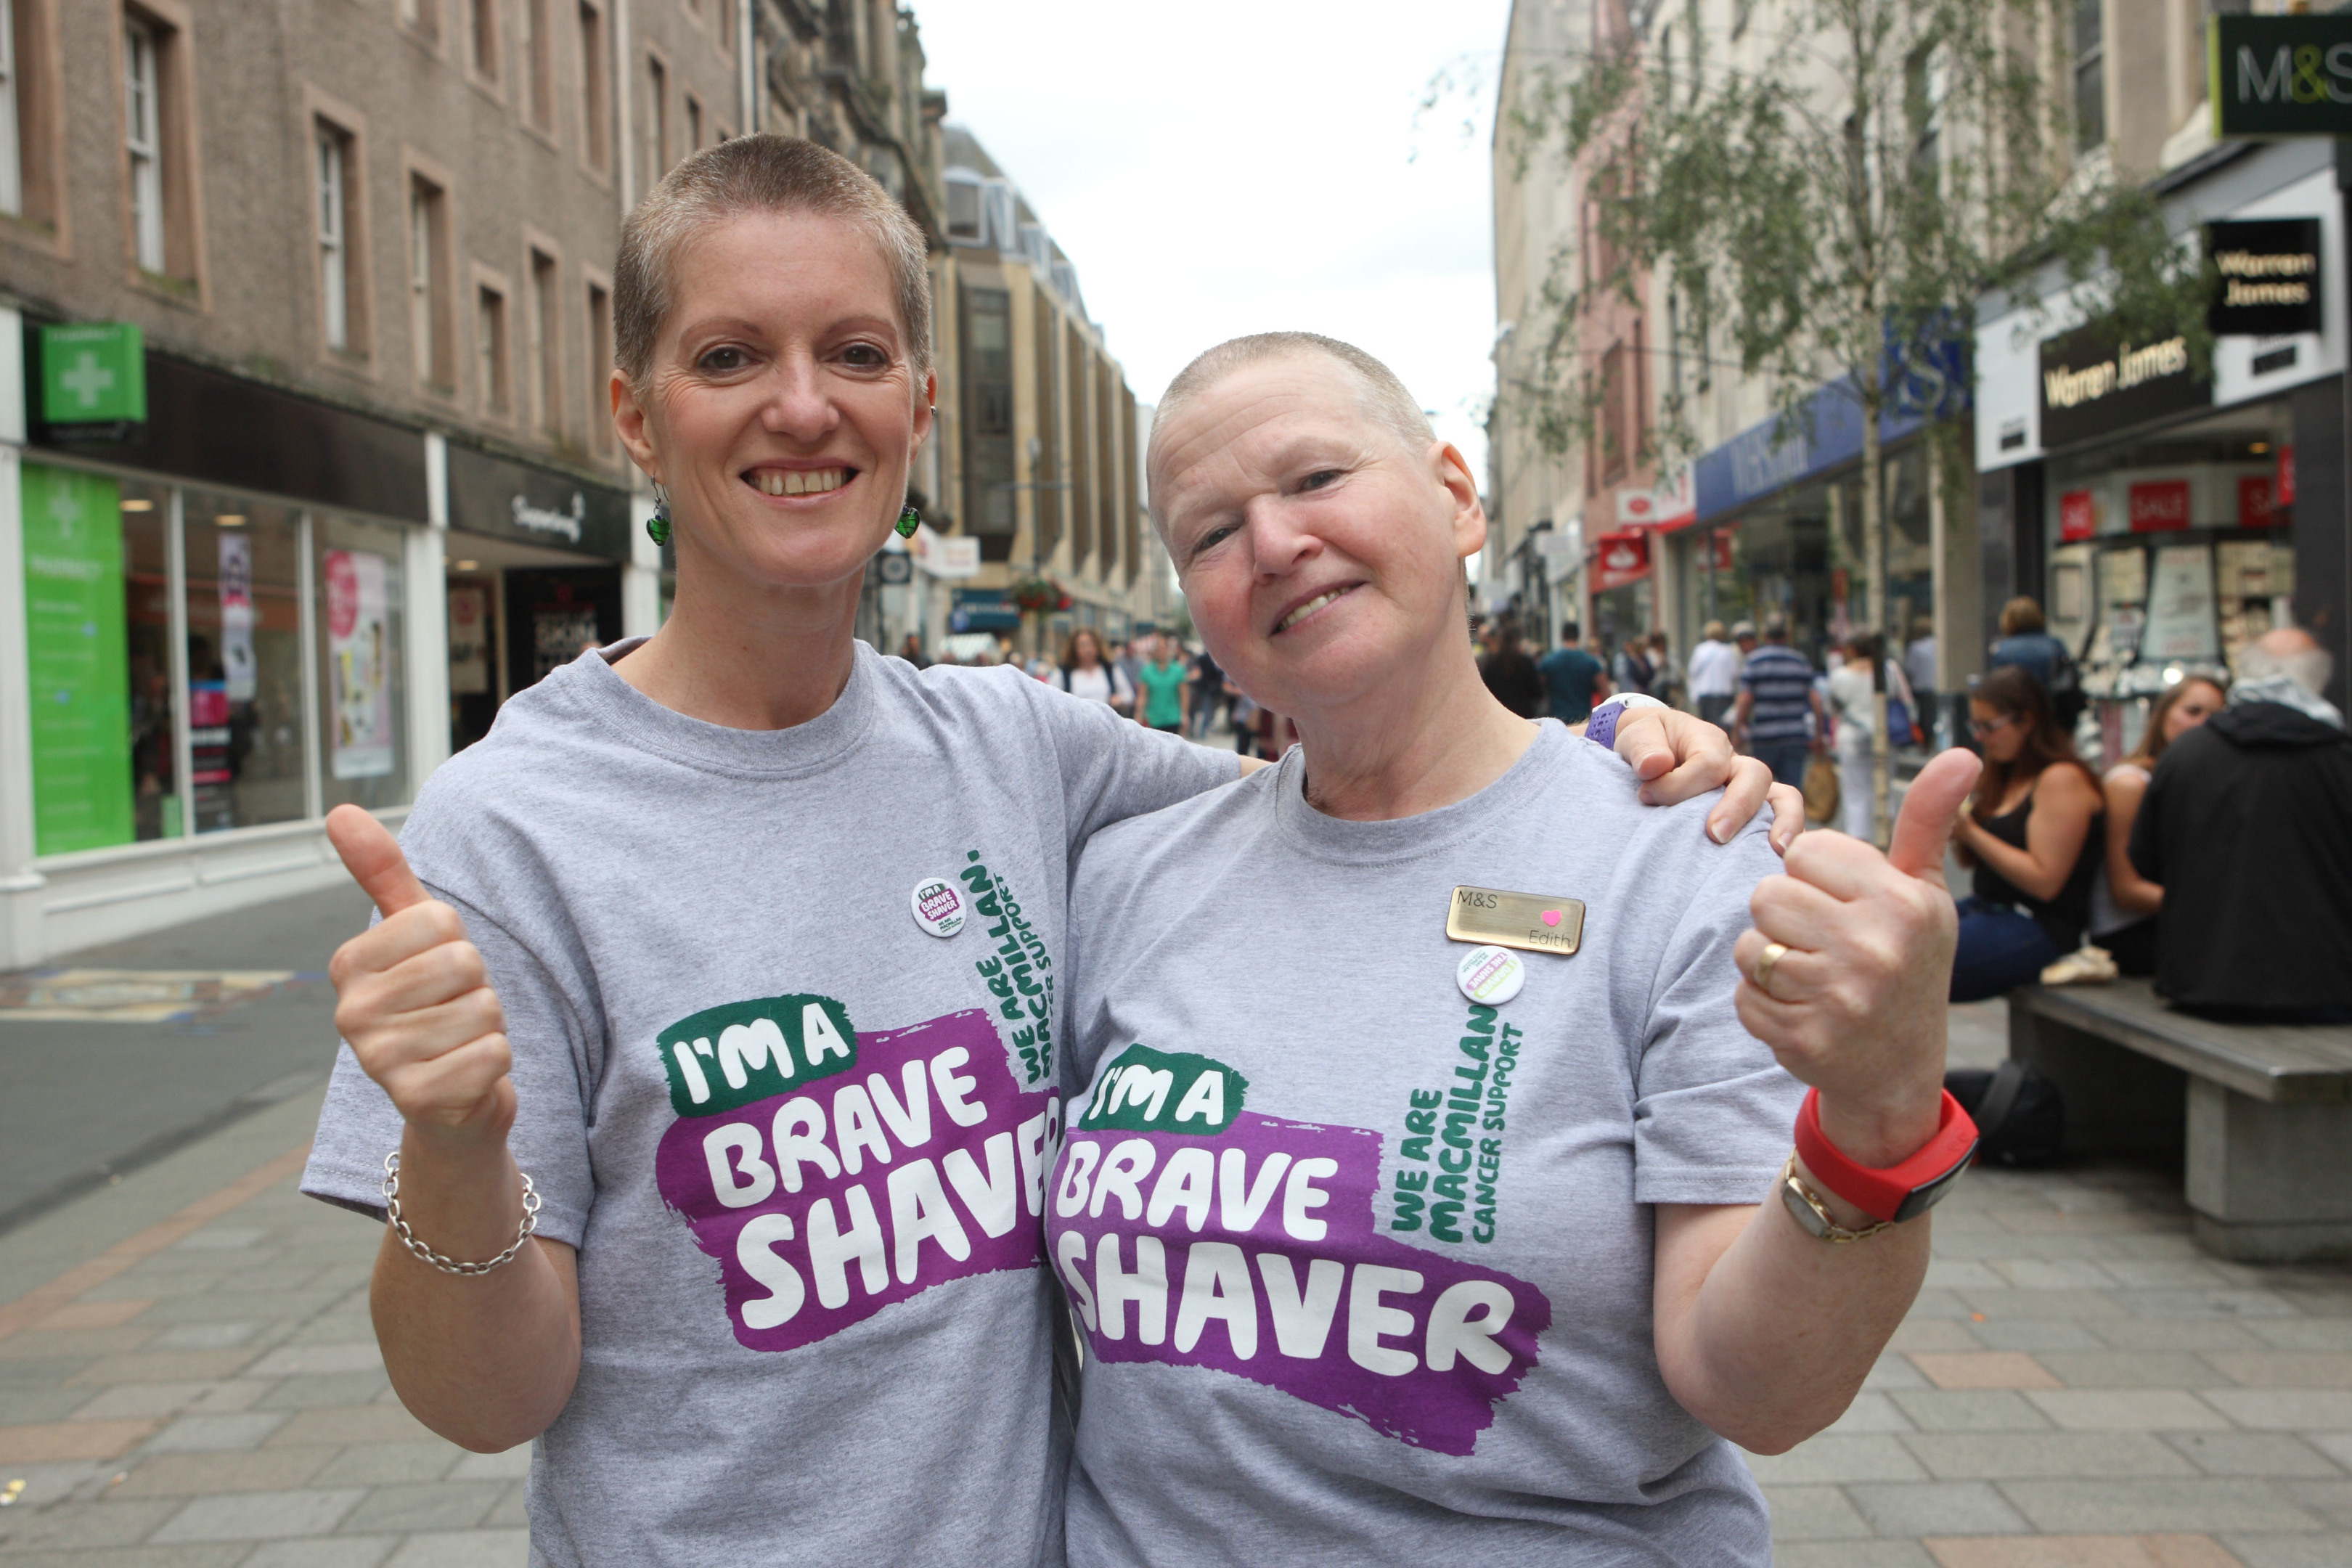 Lorraine scott (L) and Edith Hannah braved the shave for macmillan, Pic Phil Hannah